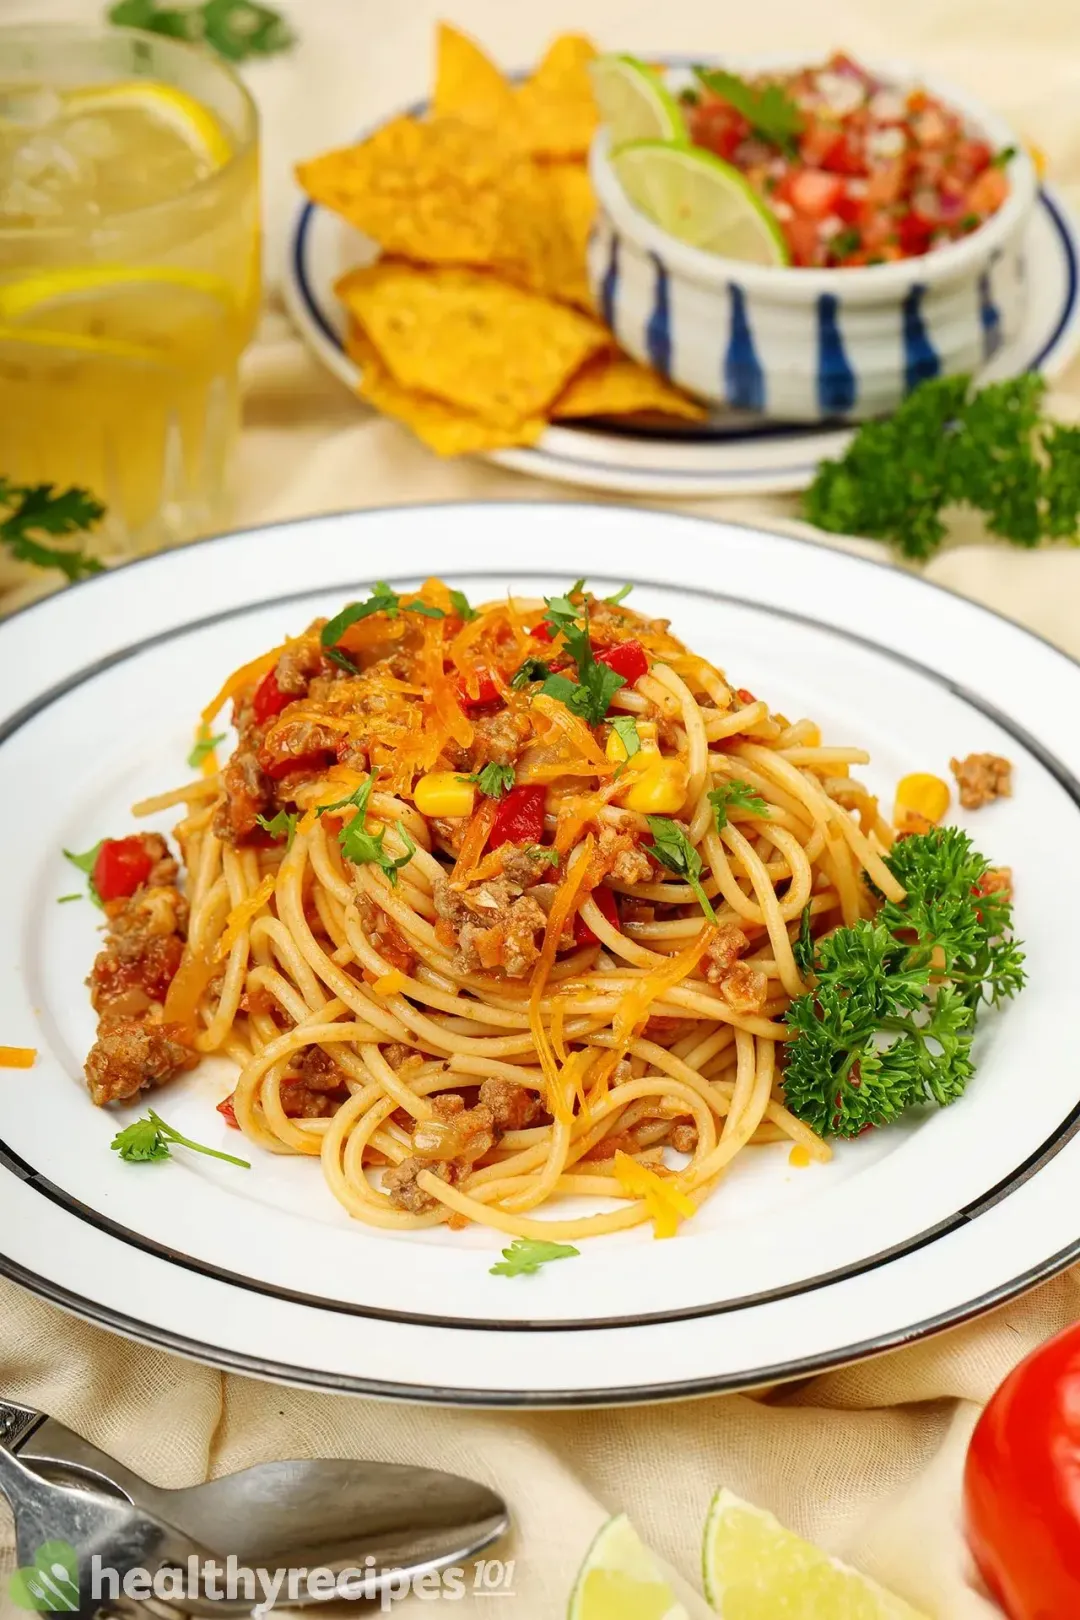 What to Serve With Mexican Spaghetti